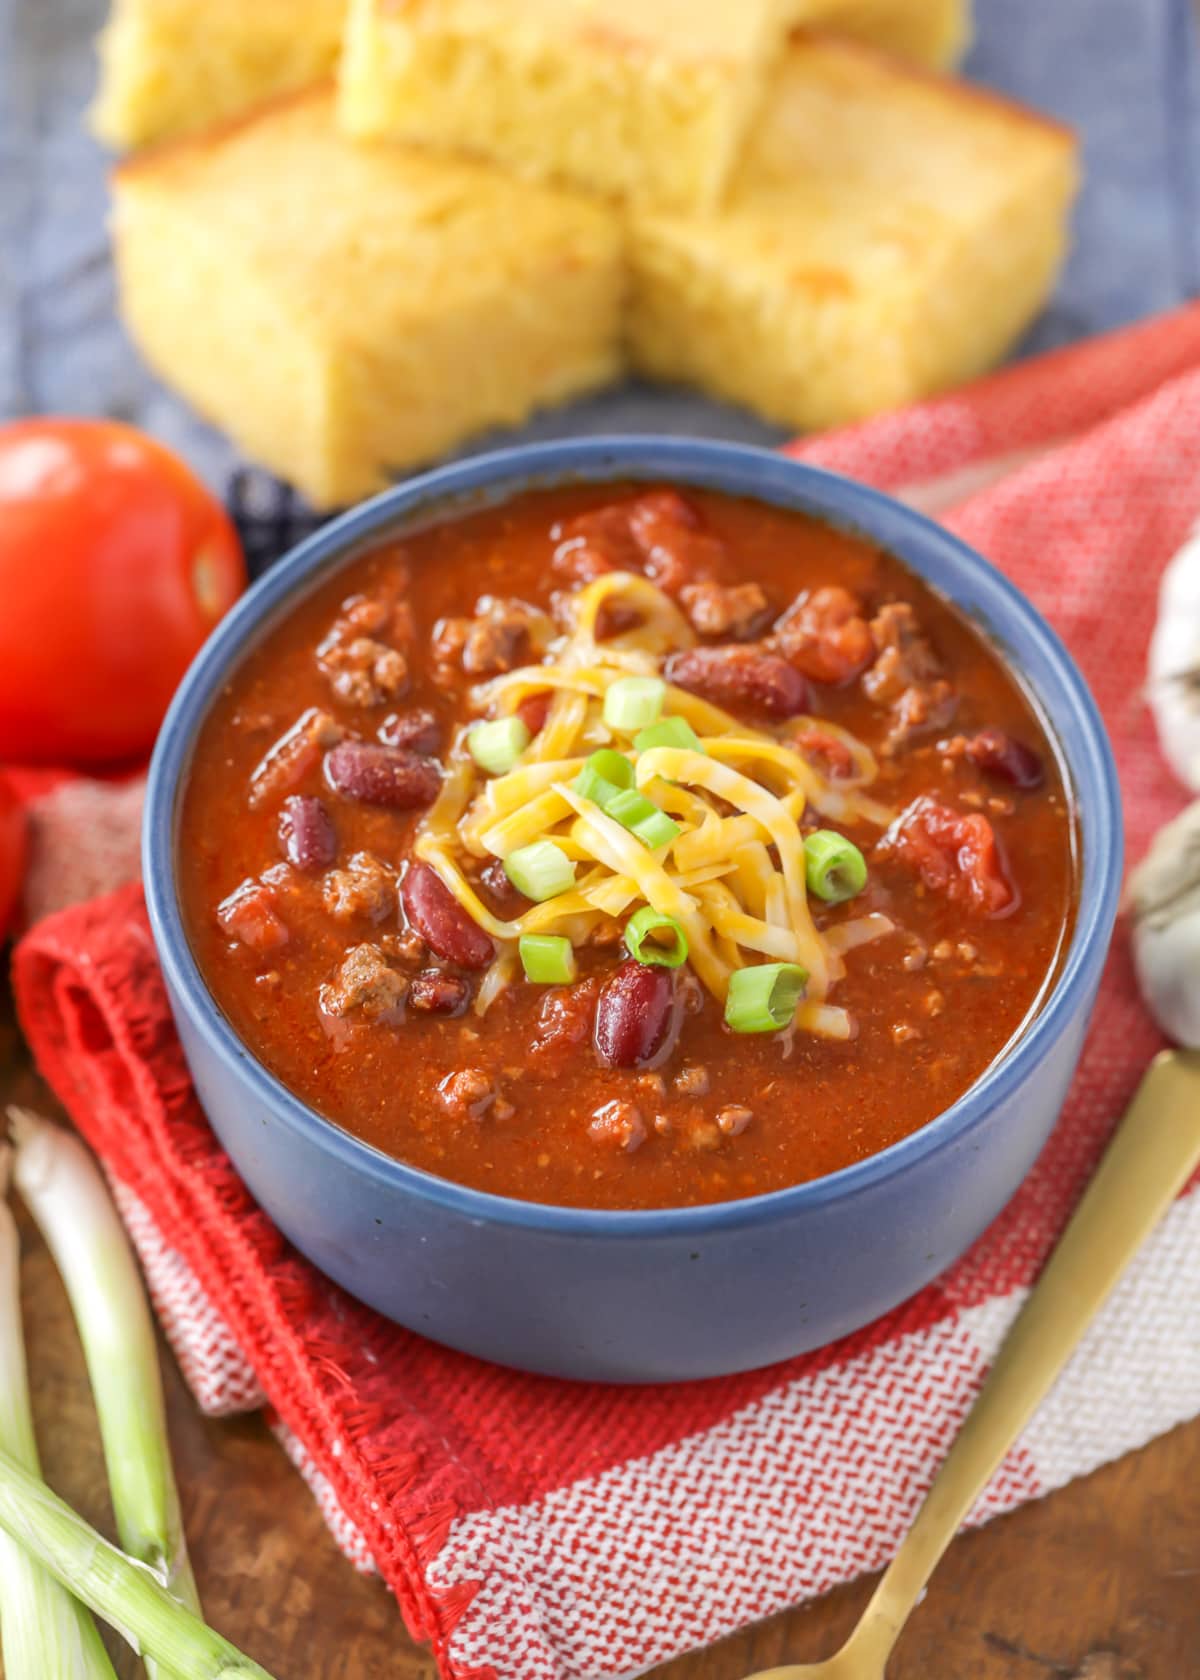 Our go-to chili recipe topped with shredded cheese and green onions.